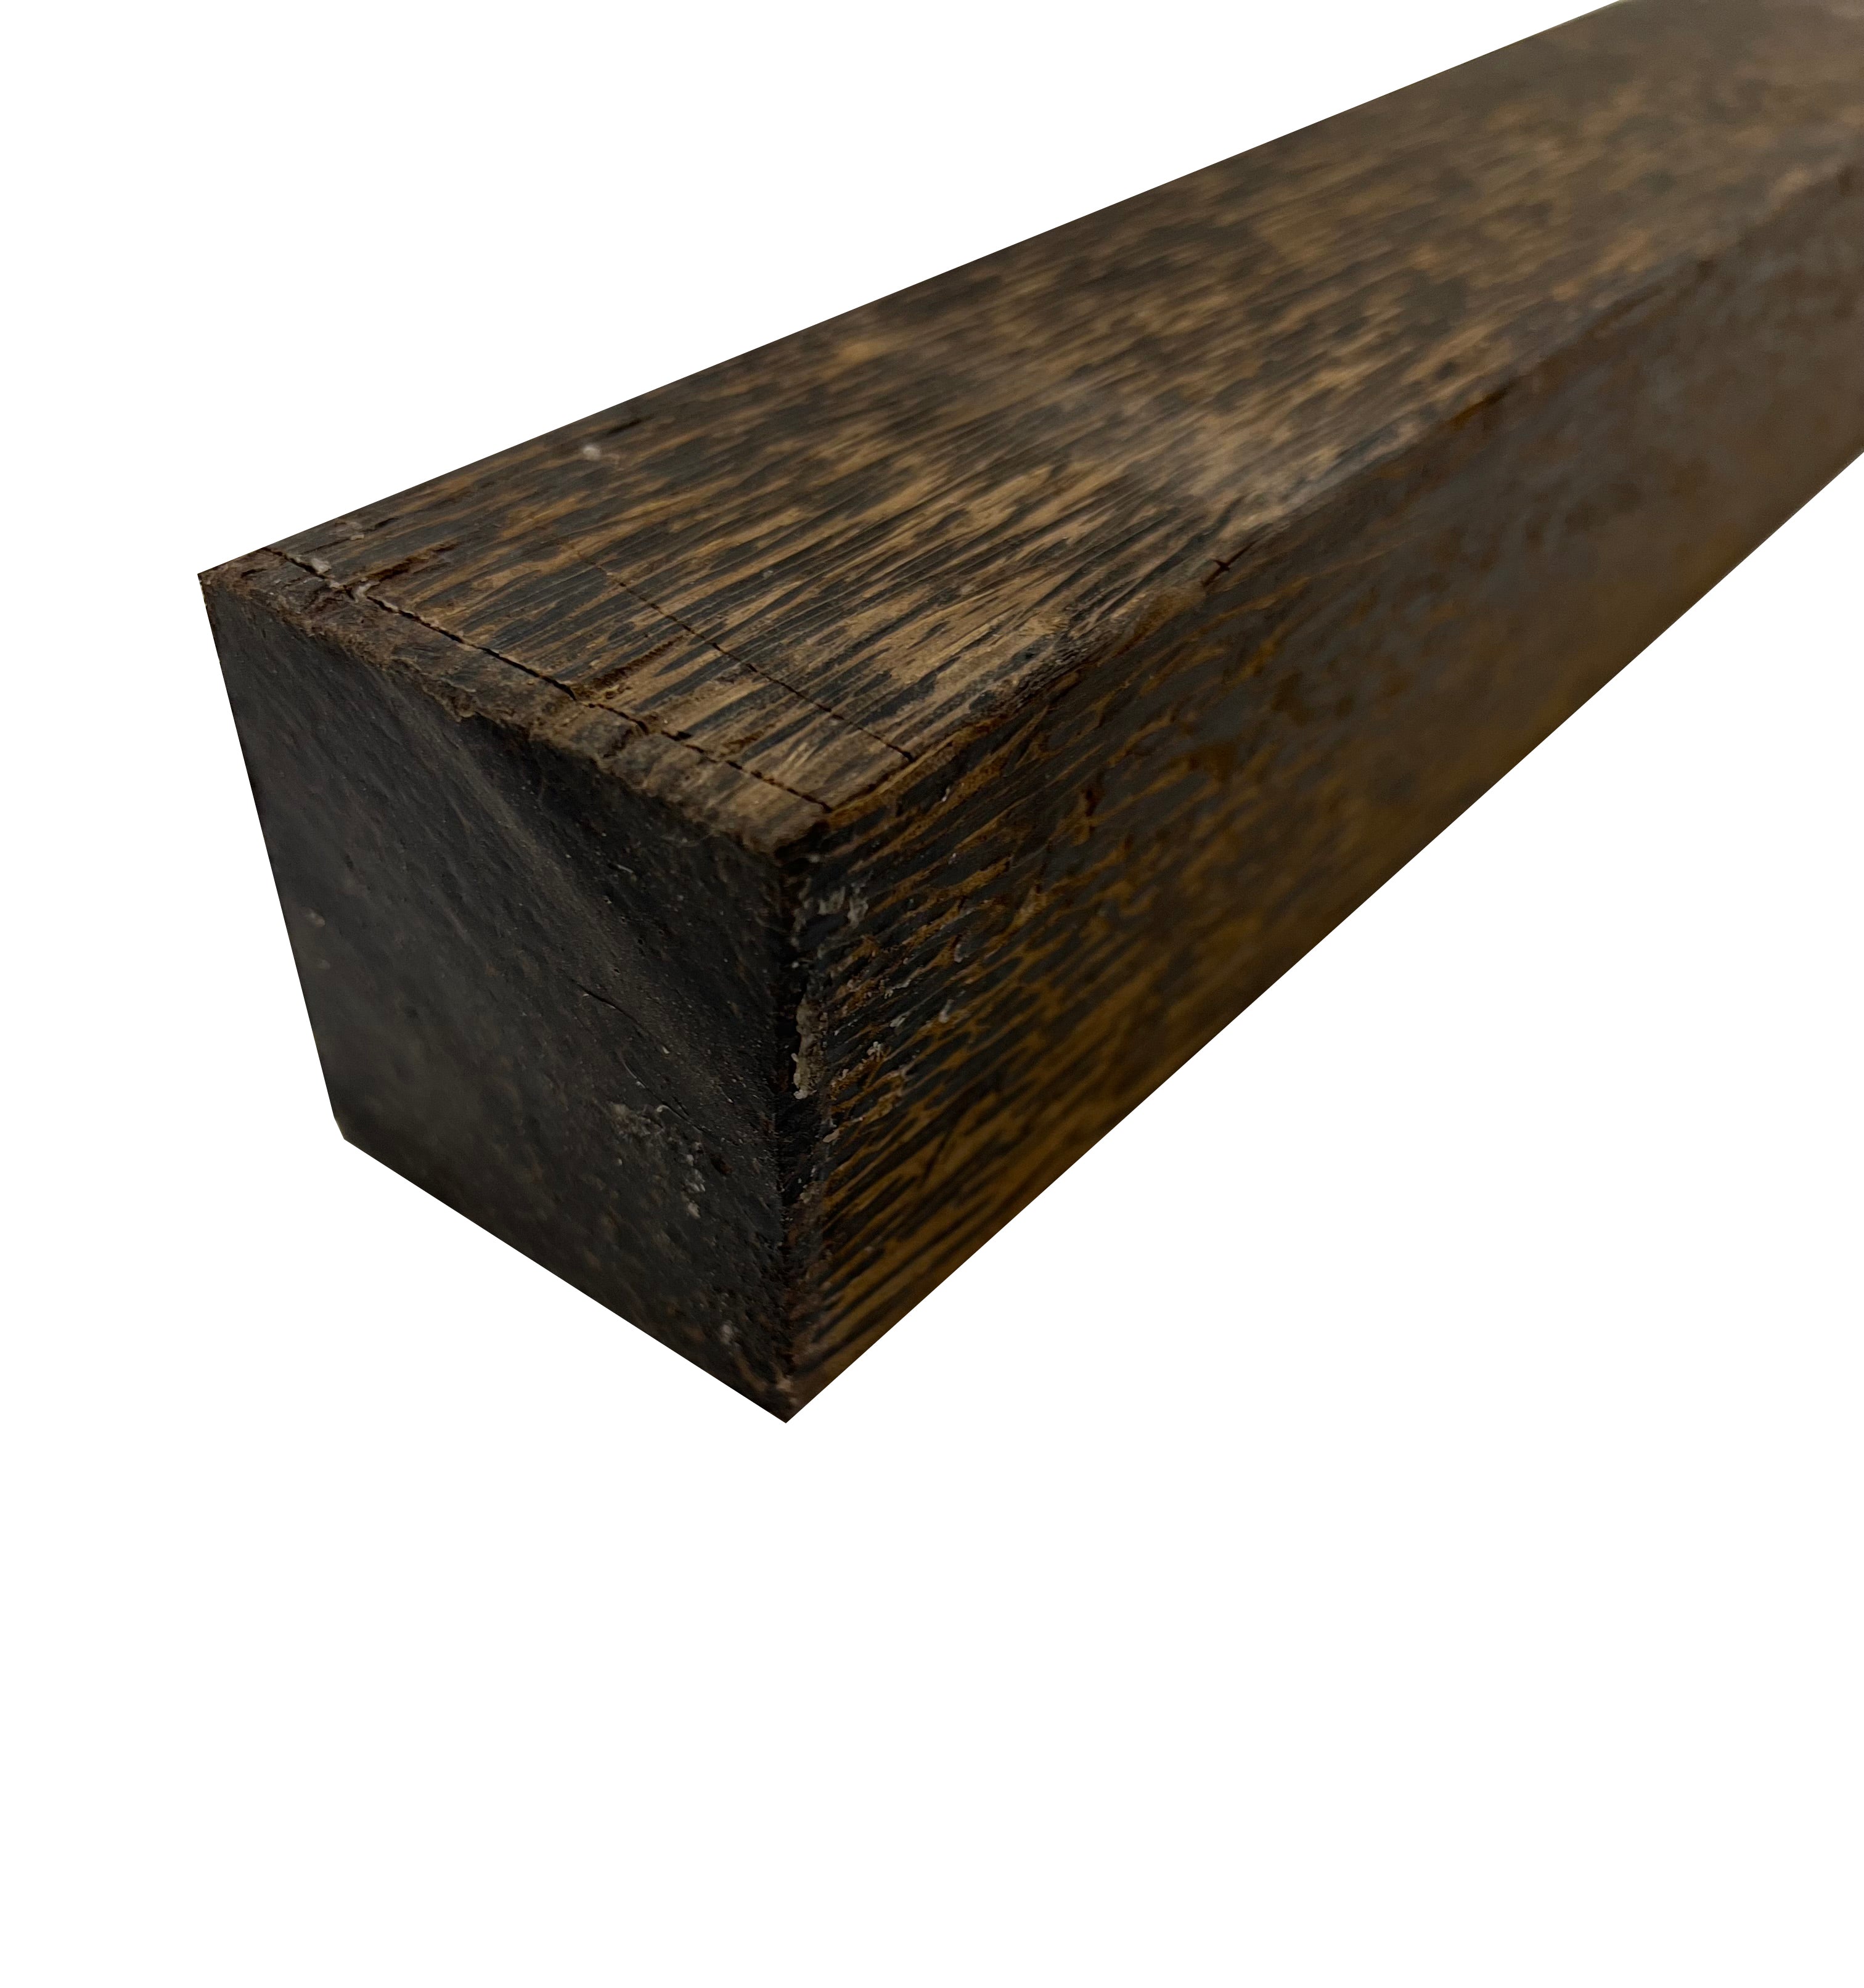 Pack Of 2, Black Palm Turning Wood Blanks 1-1/2&quot; x 1-1/2&quot; x 18&quot; Square Wood Blocks - Exotic Wood Zone - Buy online Across USA 